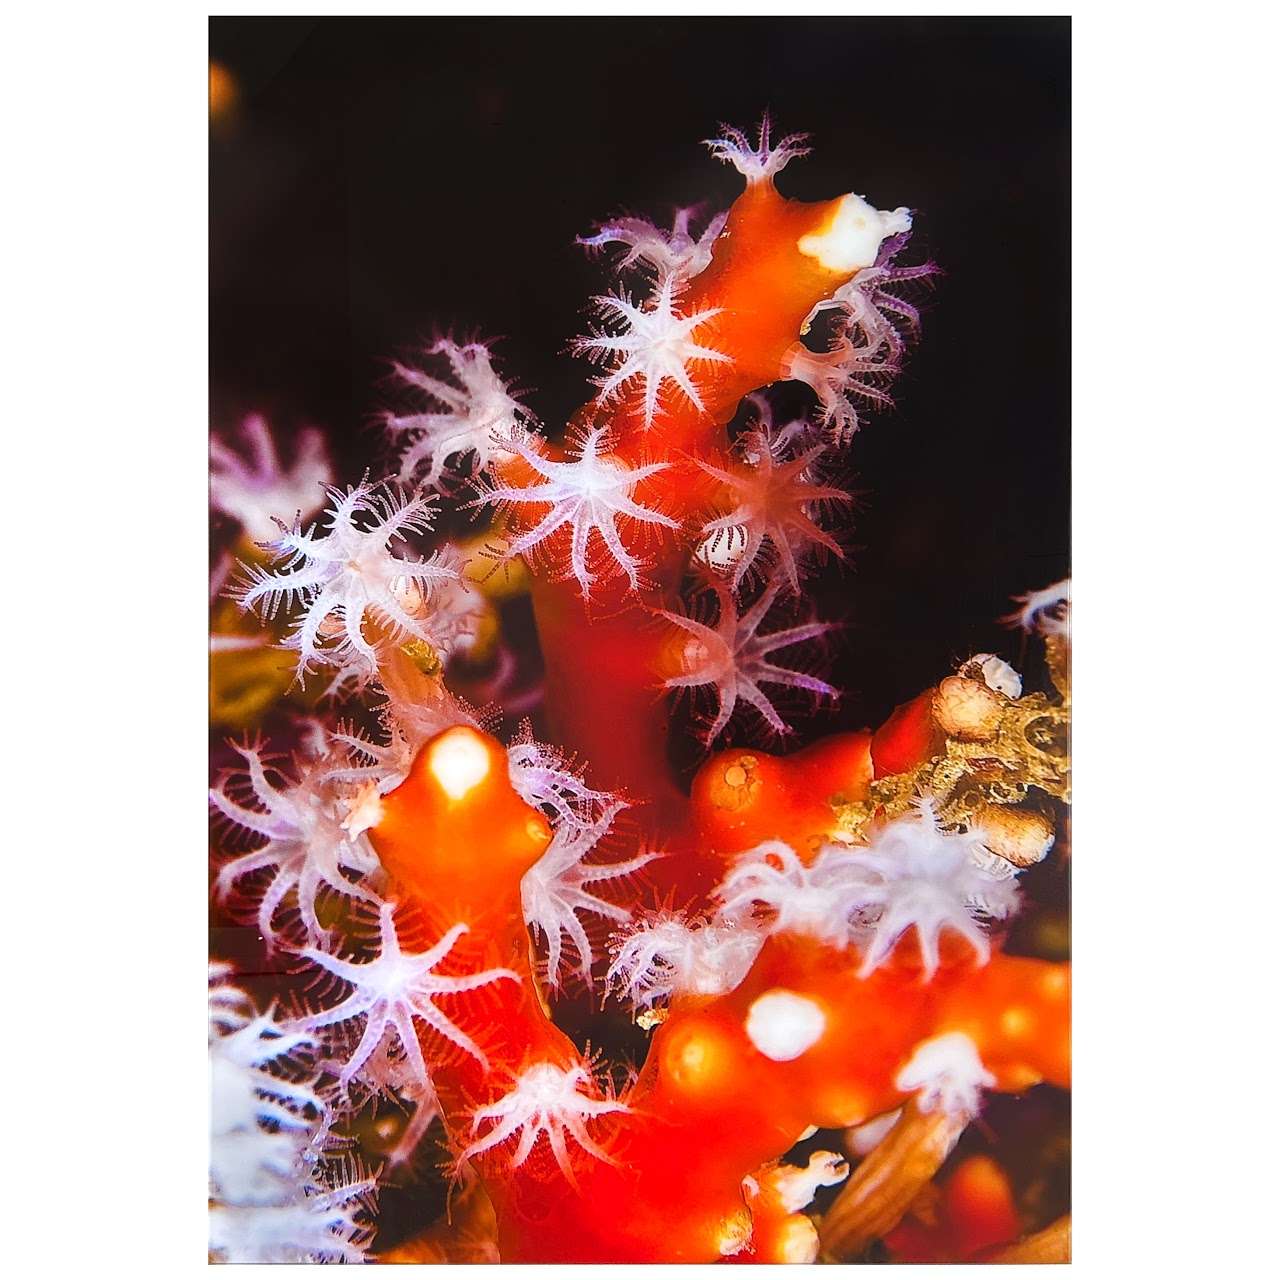 David L Raines Signed 'Coral I' Large Scale Photograph